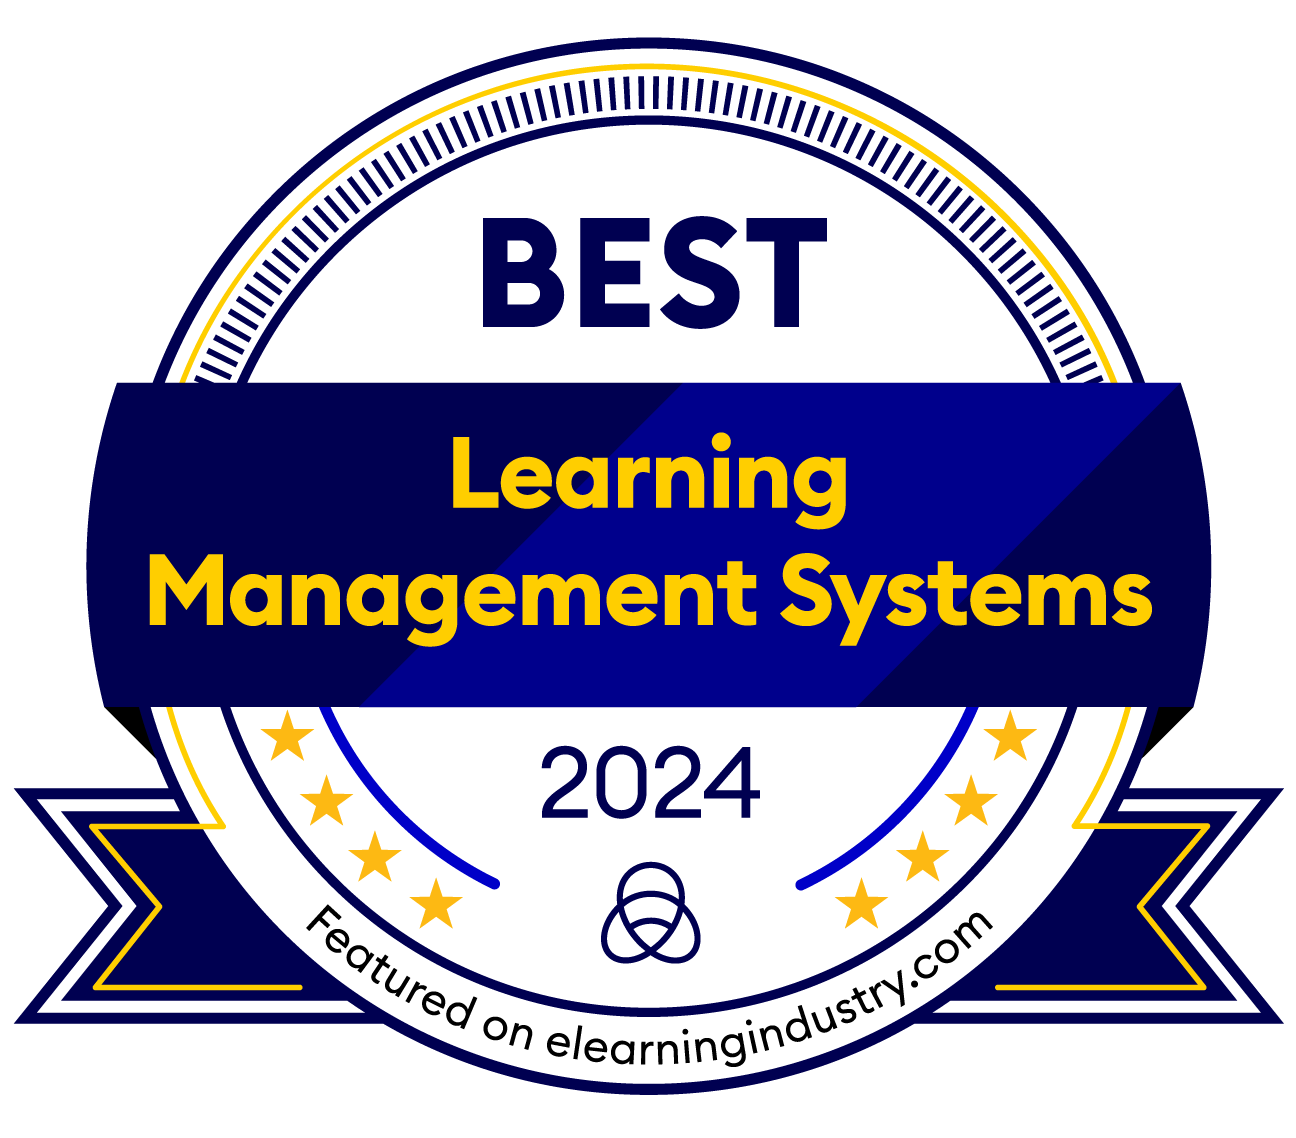 Brainier Named to 2024 Best LMS list by eLearningIndustry.com